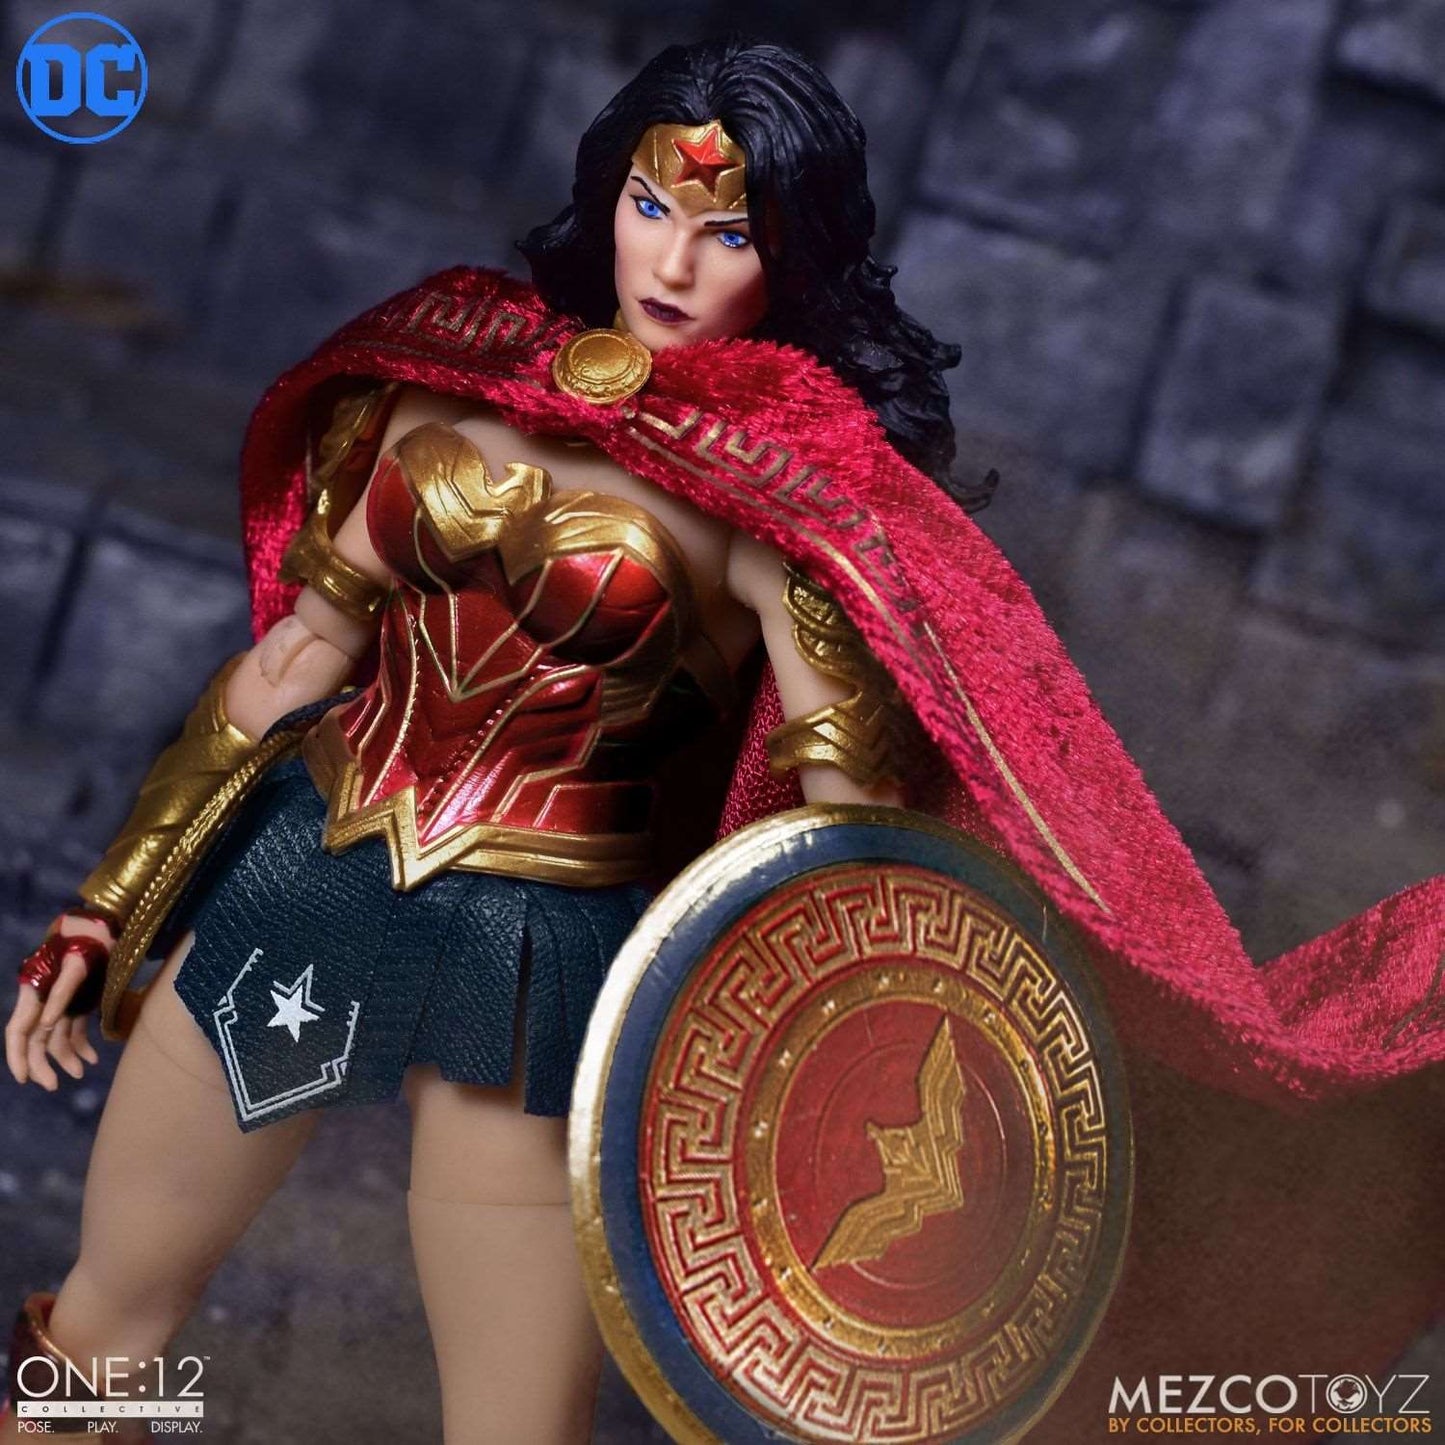 Mezco One:12 DC Universe Wonder Woman figure with shield and cape